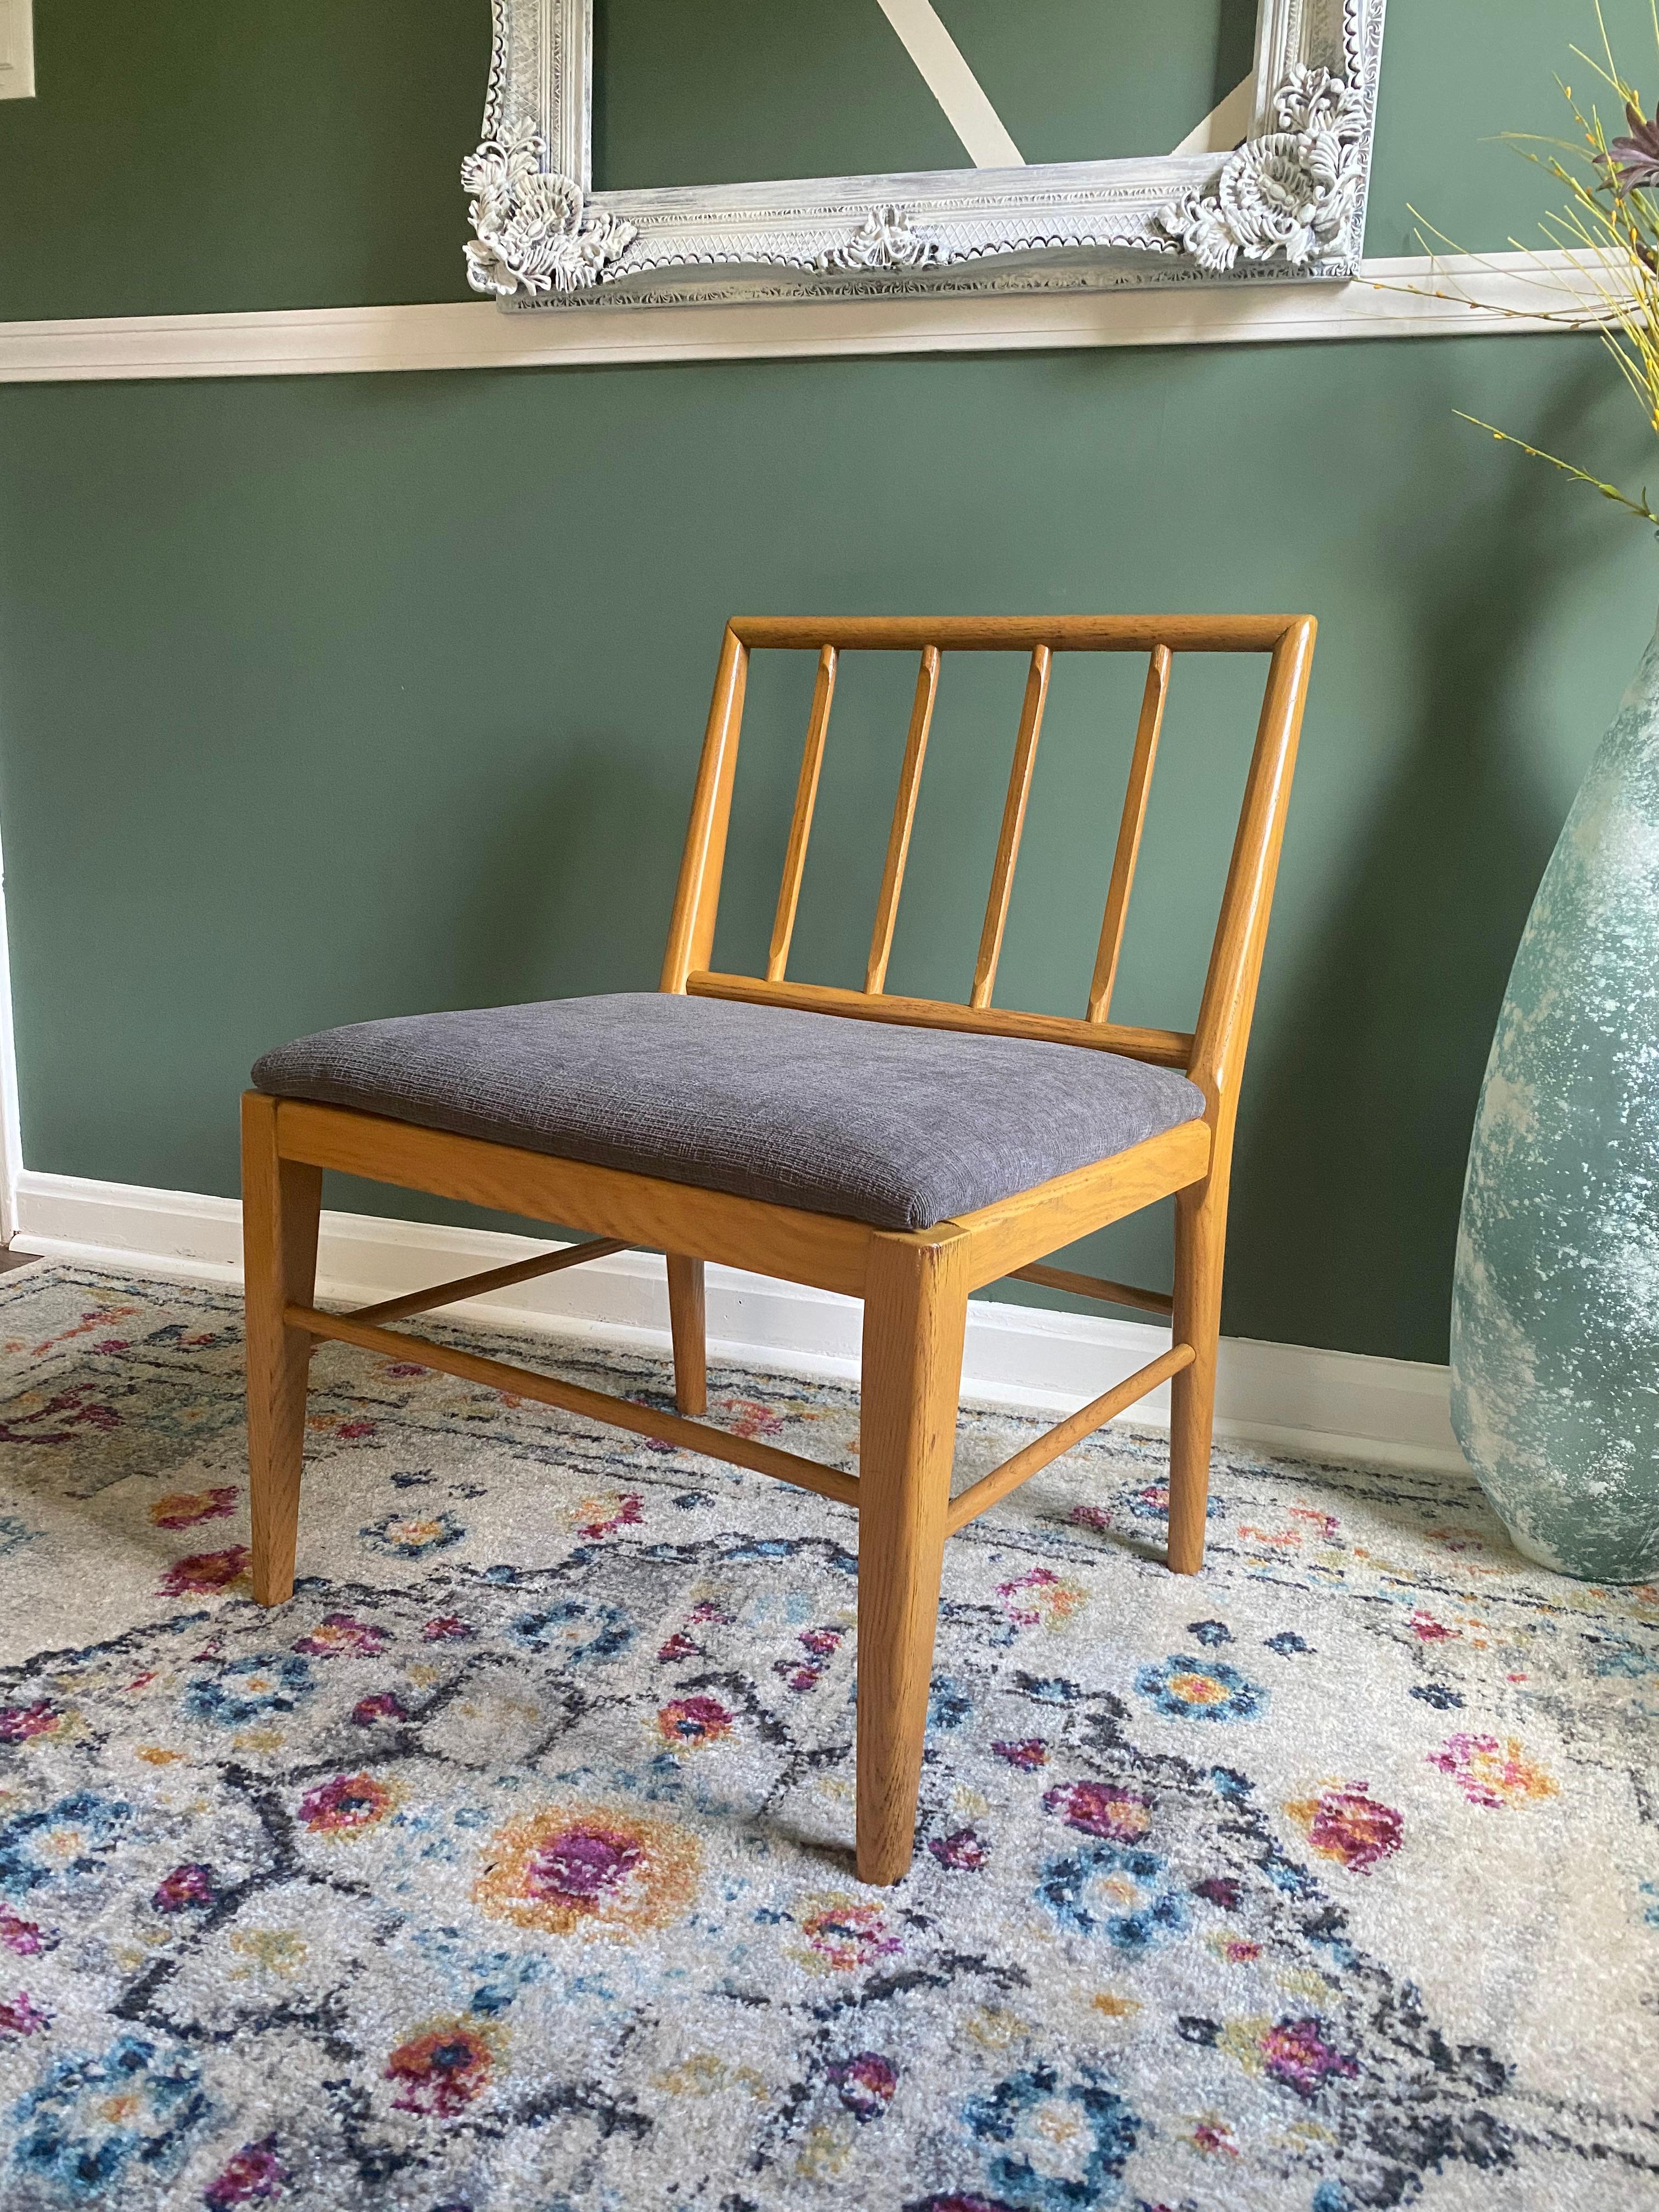 Mid-Century Modern Danish Paul McCobb-Style Reupholstered Lounge / Accent Chair In Good Condition For Sale In Medina, OH